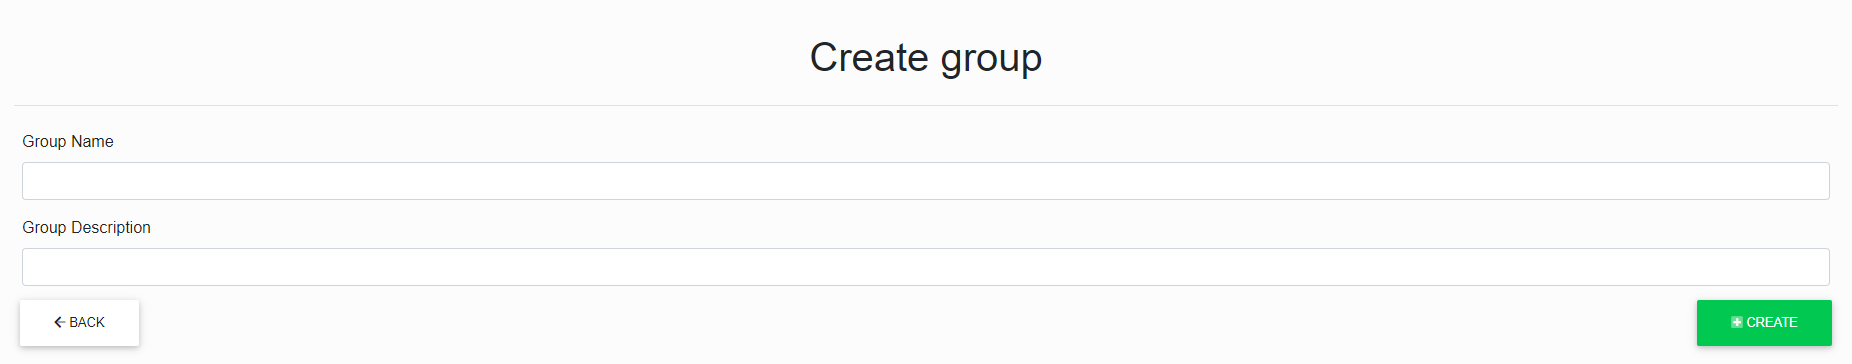 create group.png